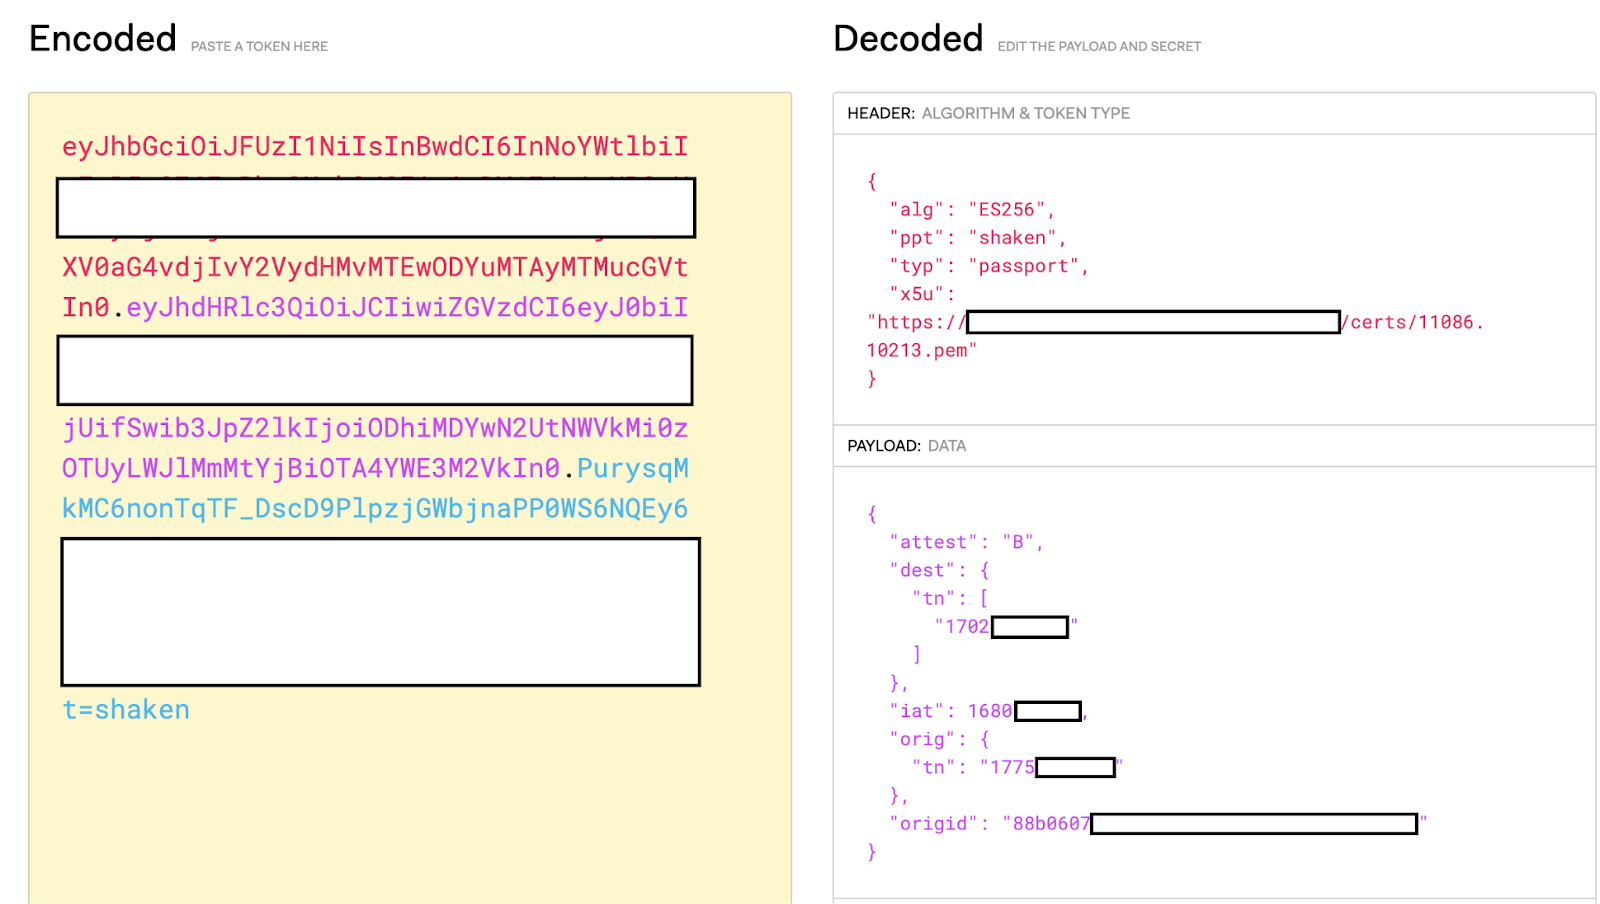 Decoding a token with jwt.io